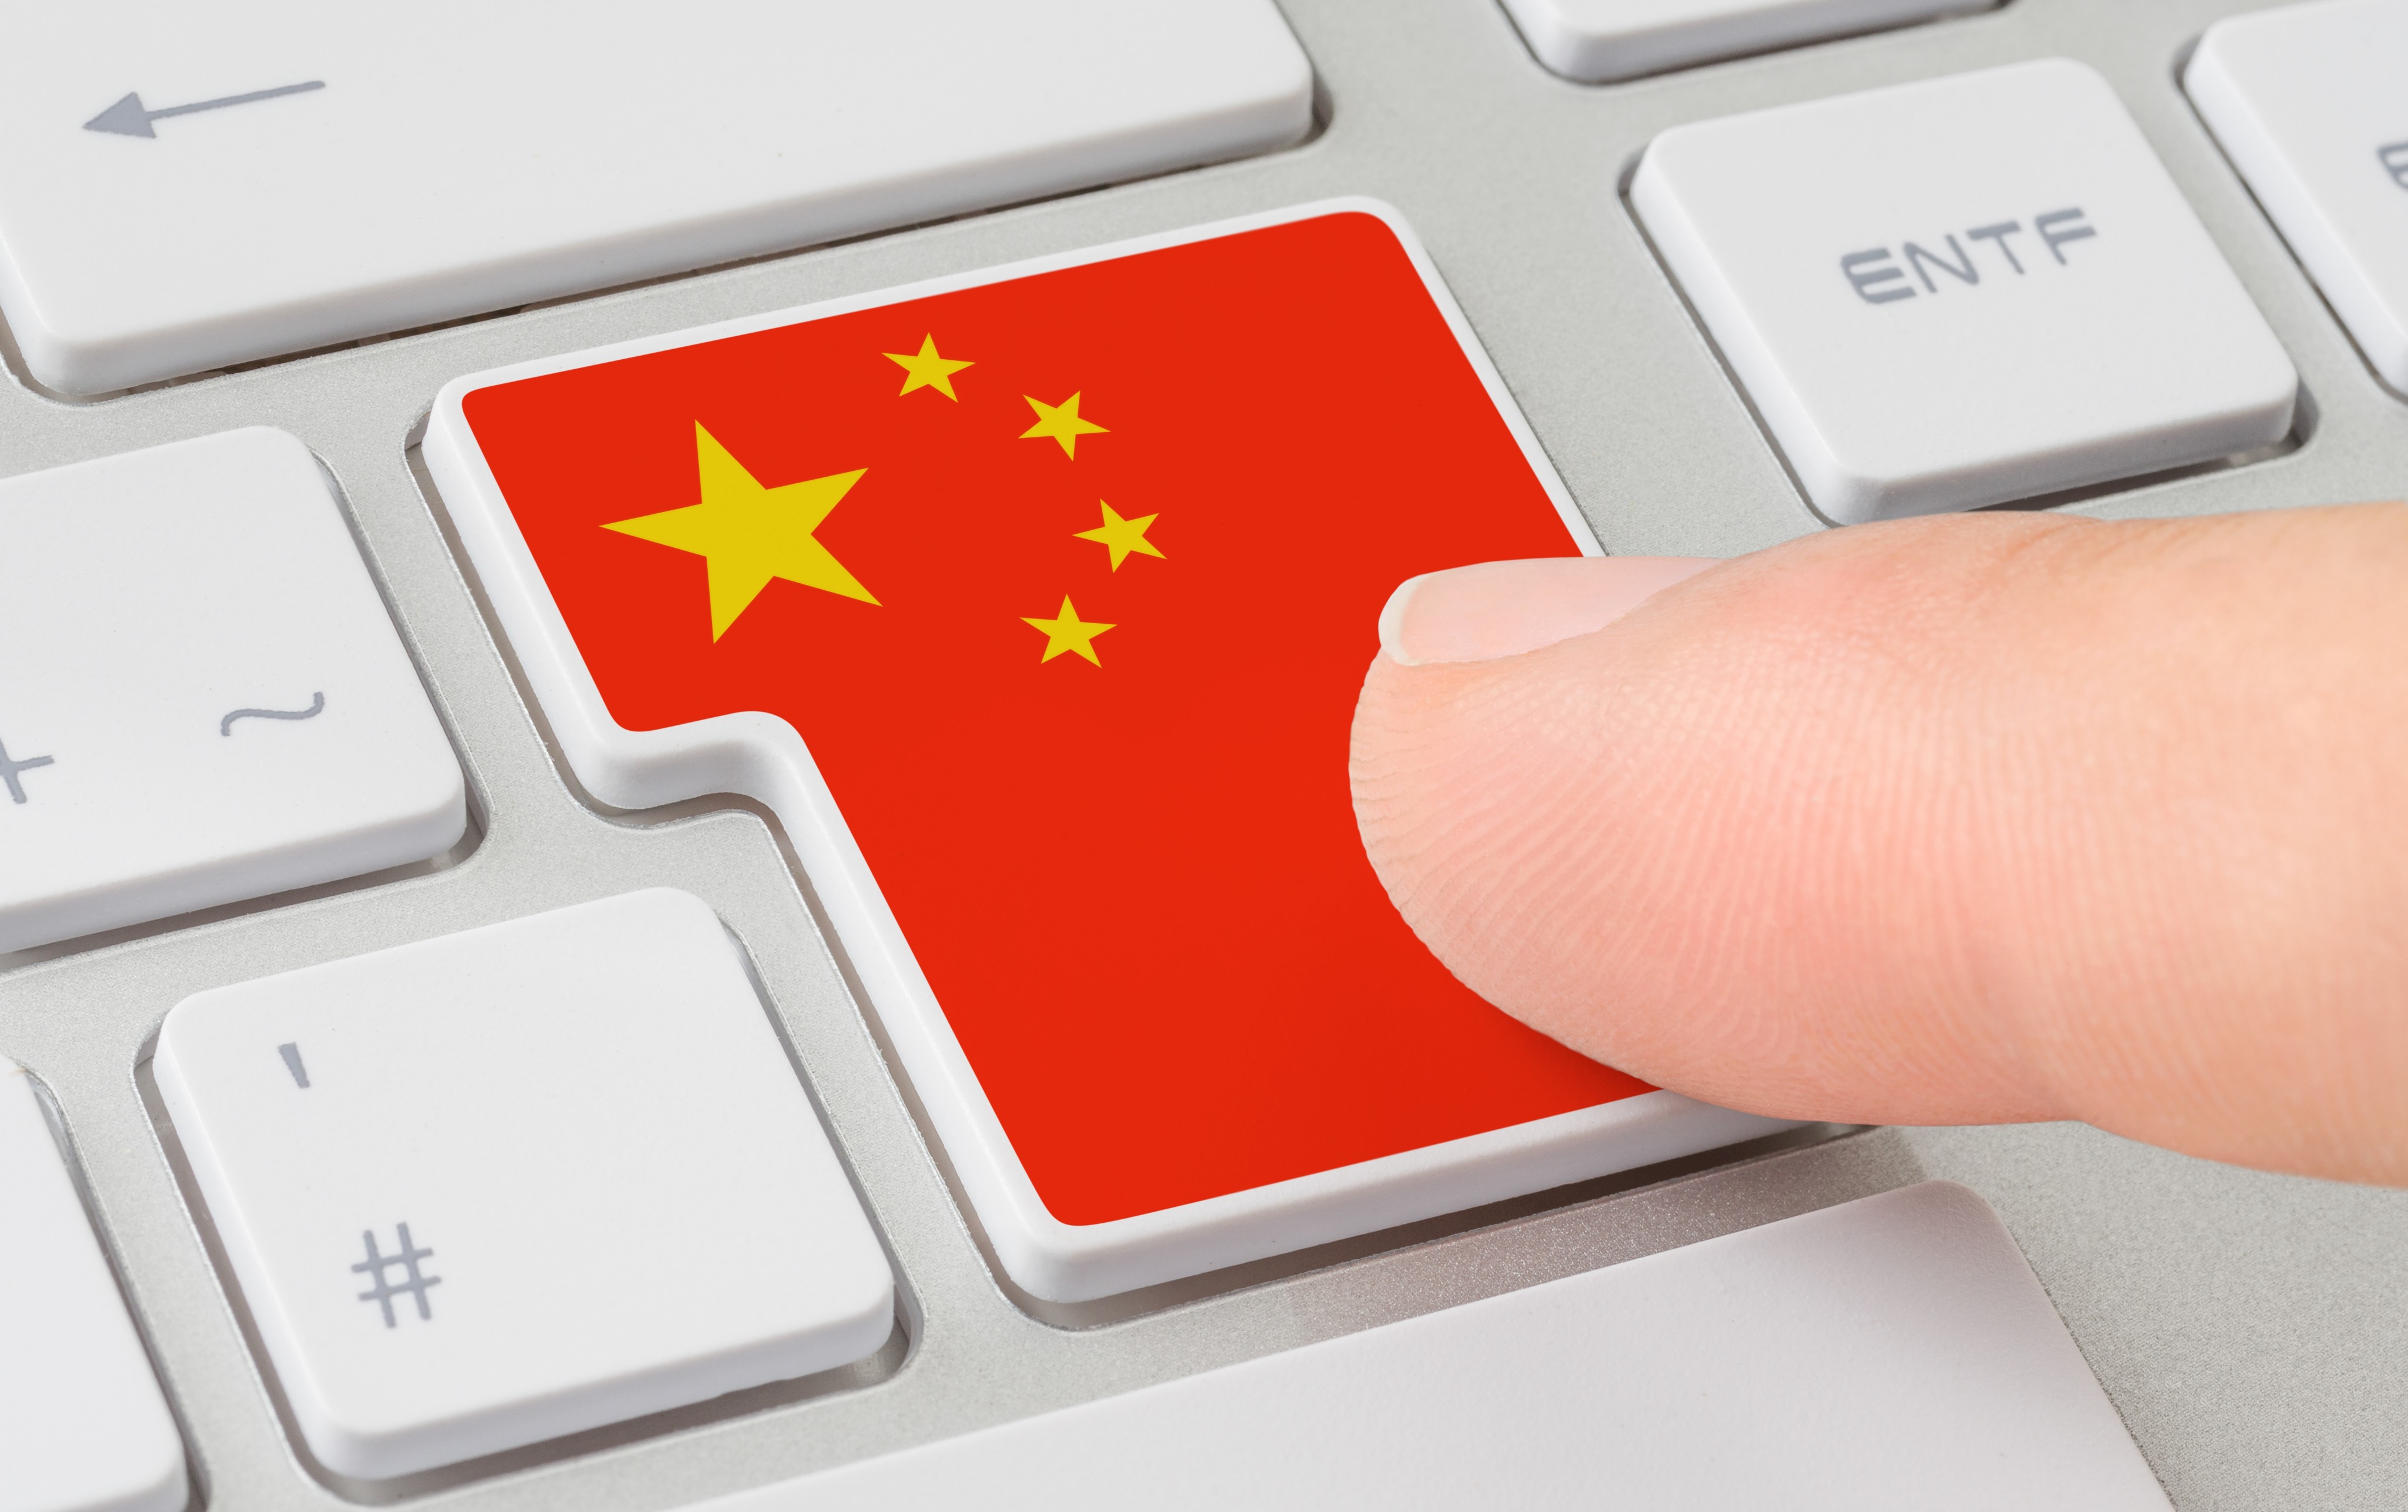 The policy support for the mainland’s digital economy signals Beijing’s response to the Biden administration’s recent moves imposing further restrictions against China’s tech industry. Photo: Shutterstock